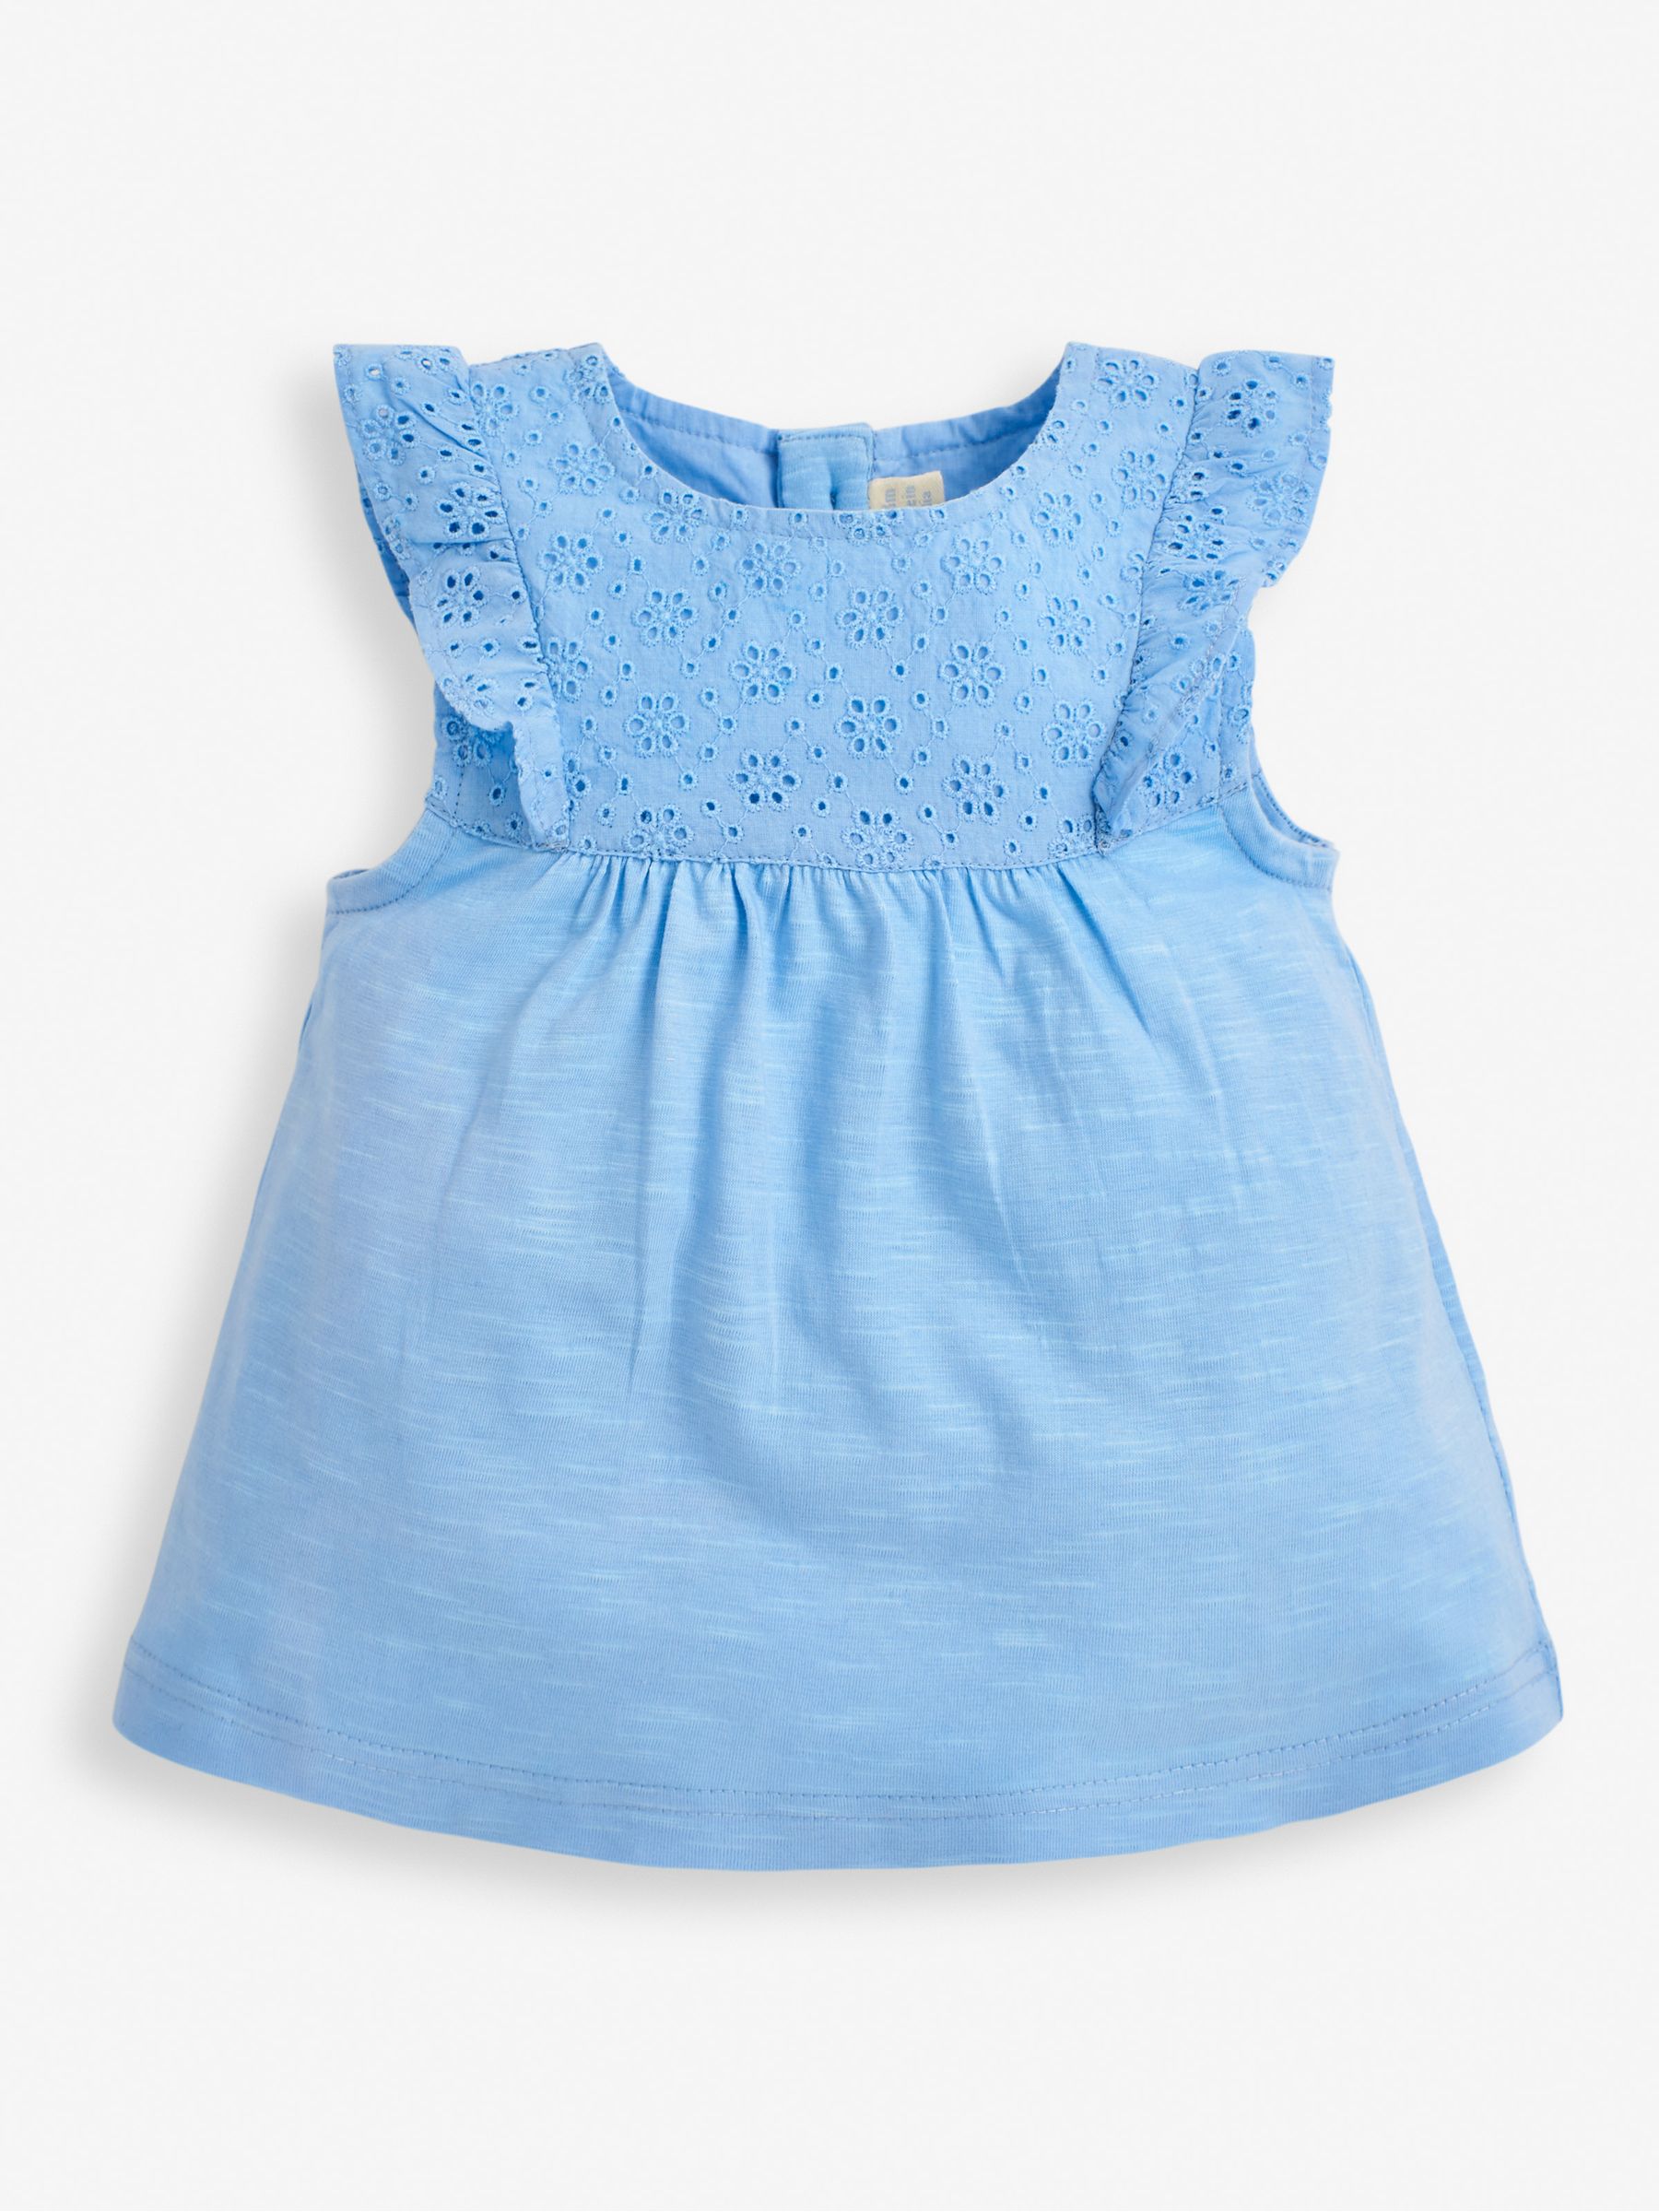 Buy Blue Girls' Pretty Embroidered Top from the JoJo Maman Bébé UK ...